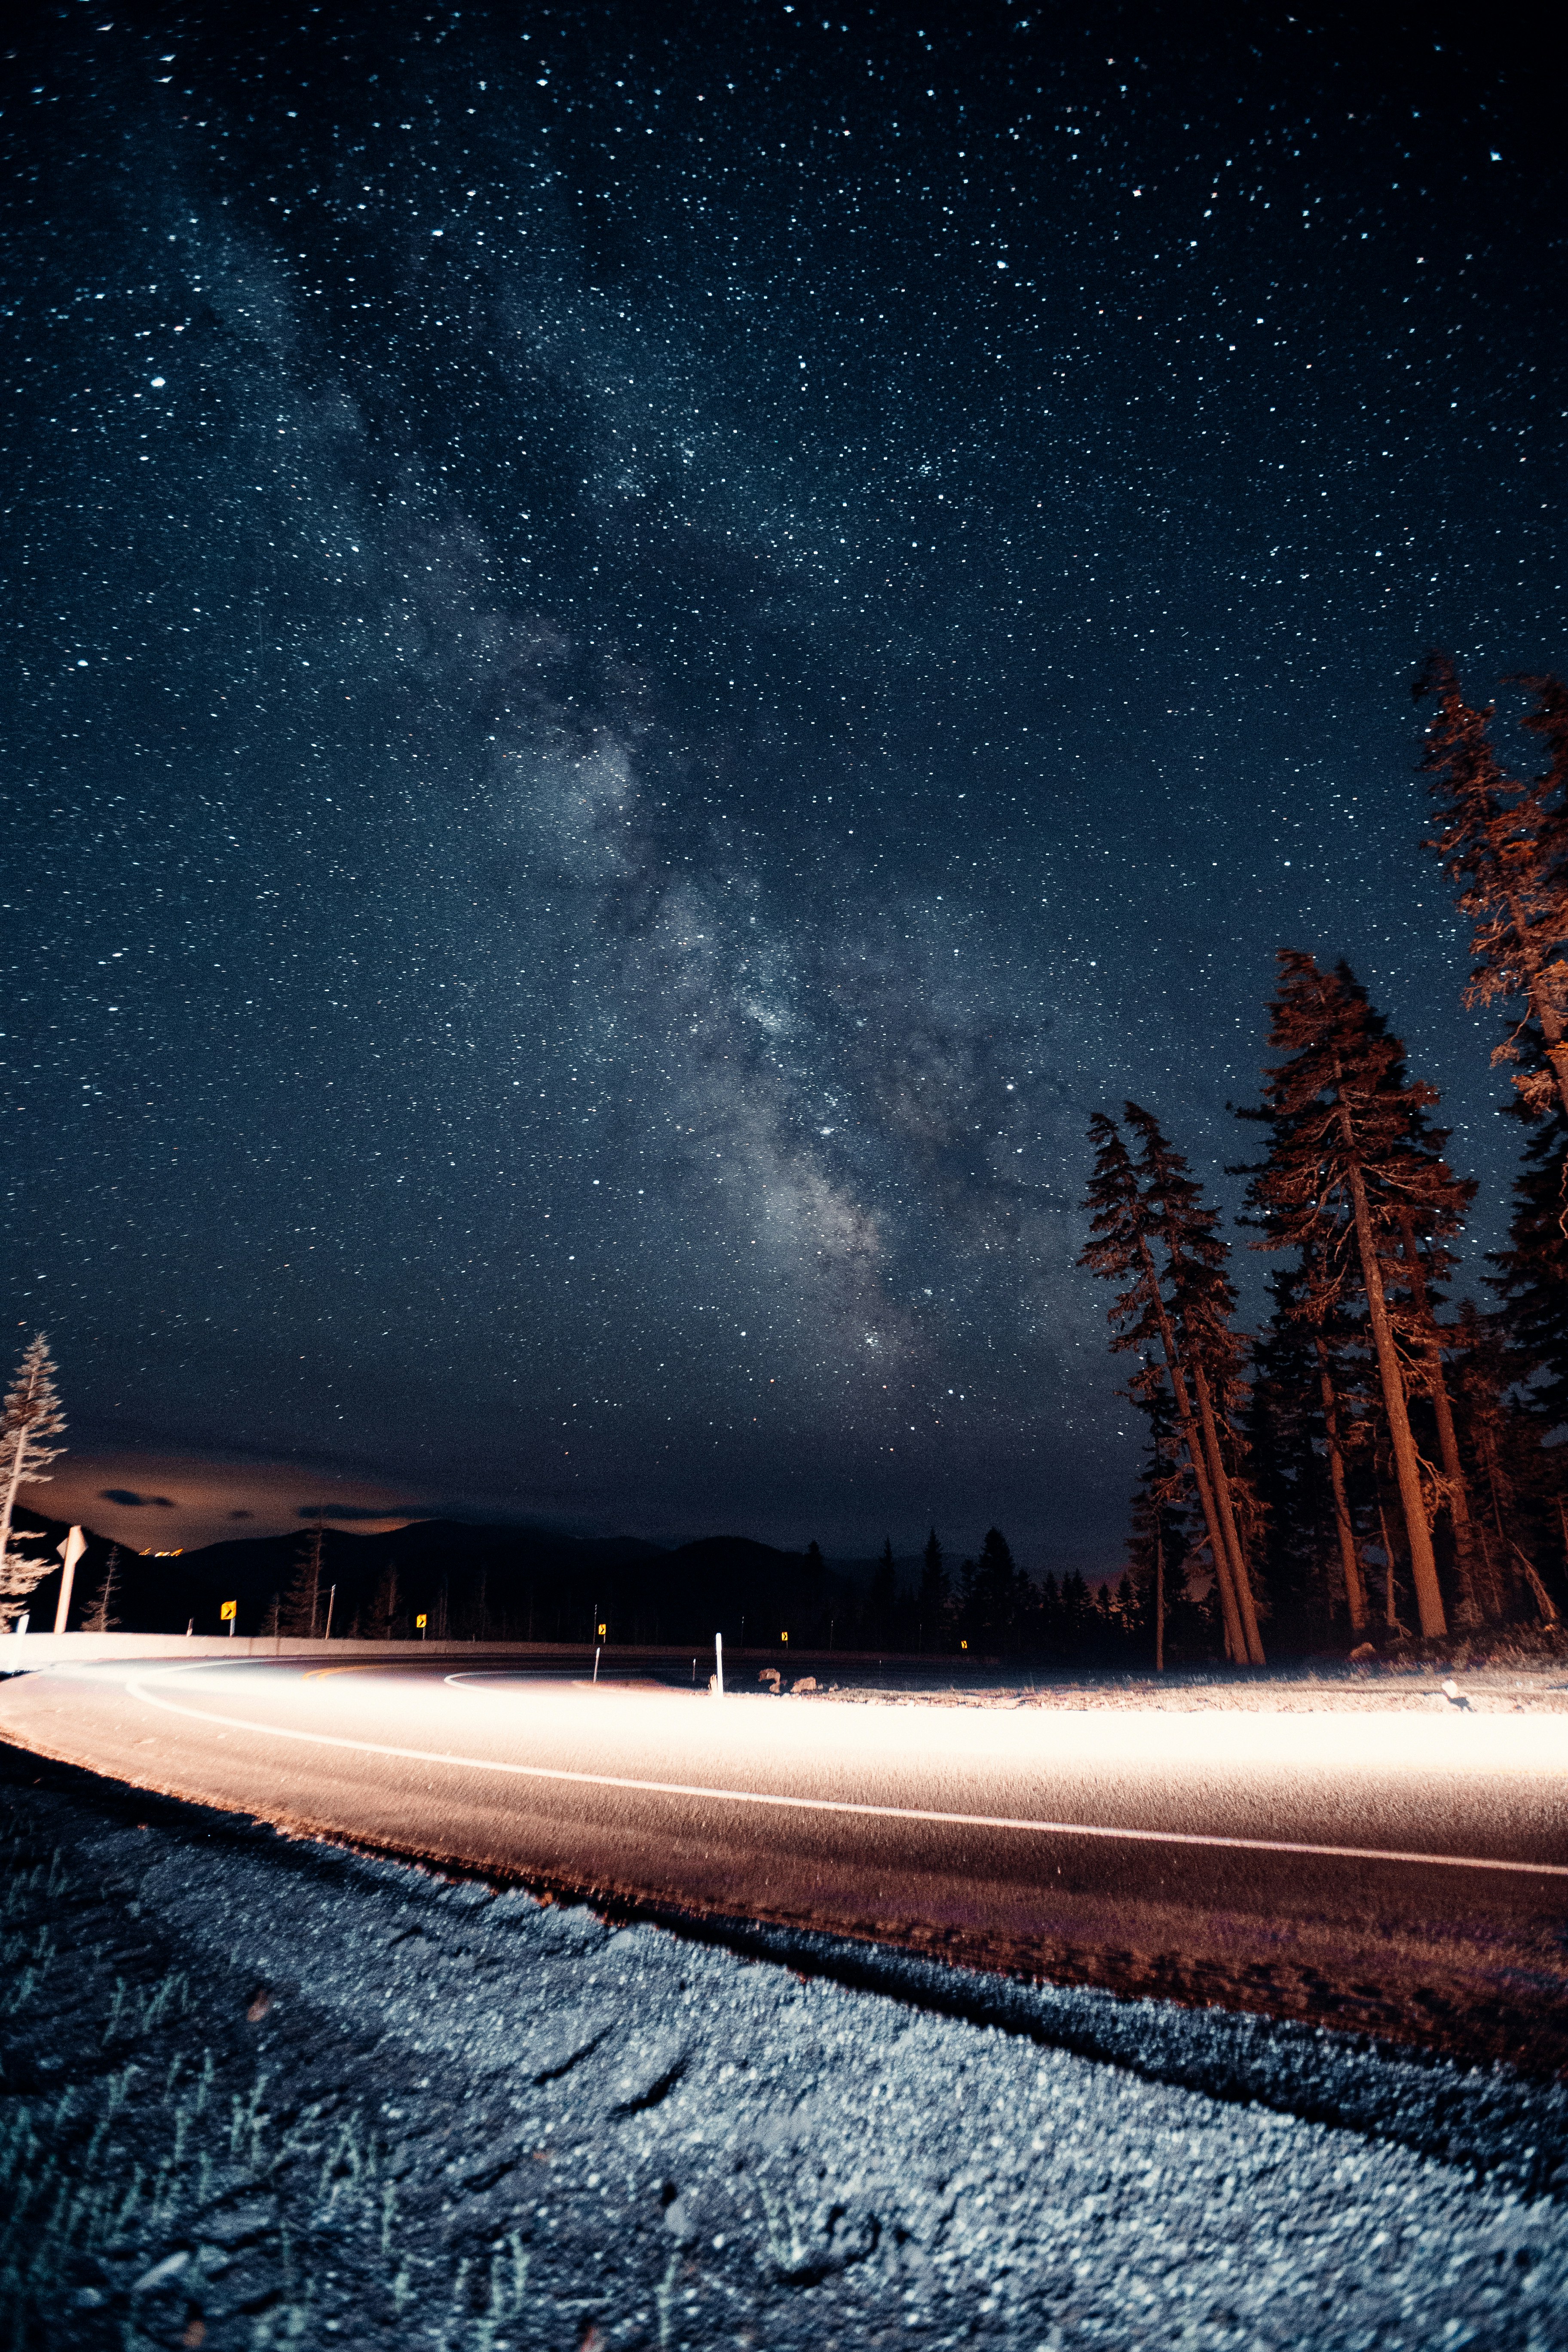 trees and snow covered ground under starry night